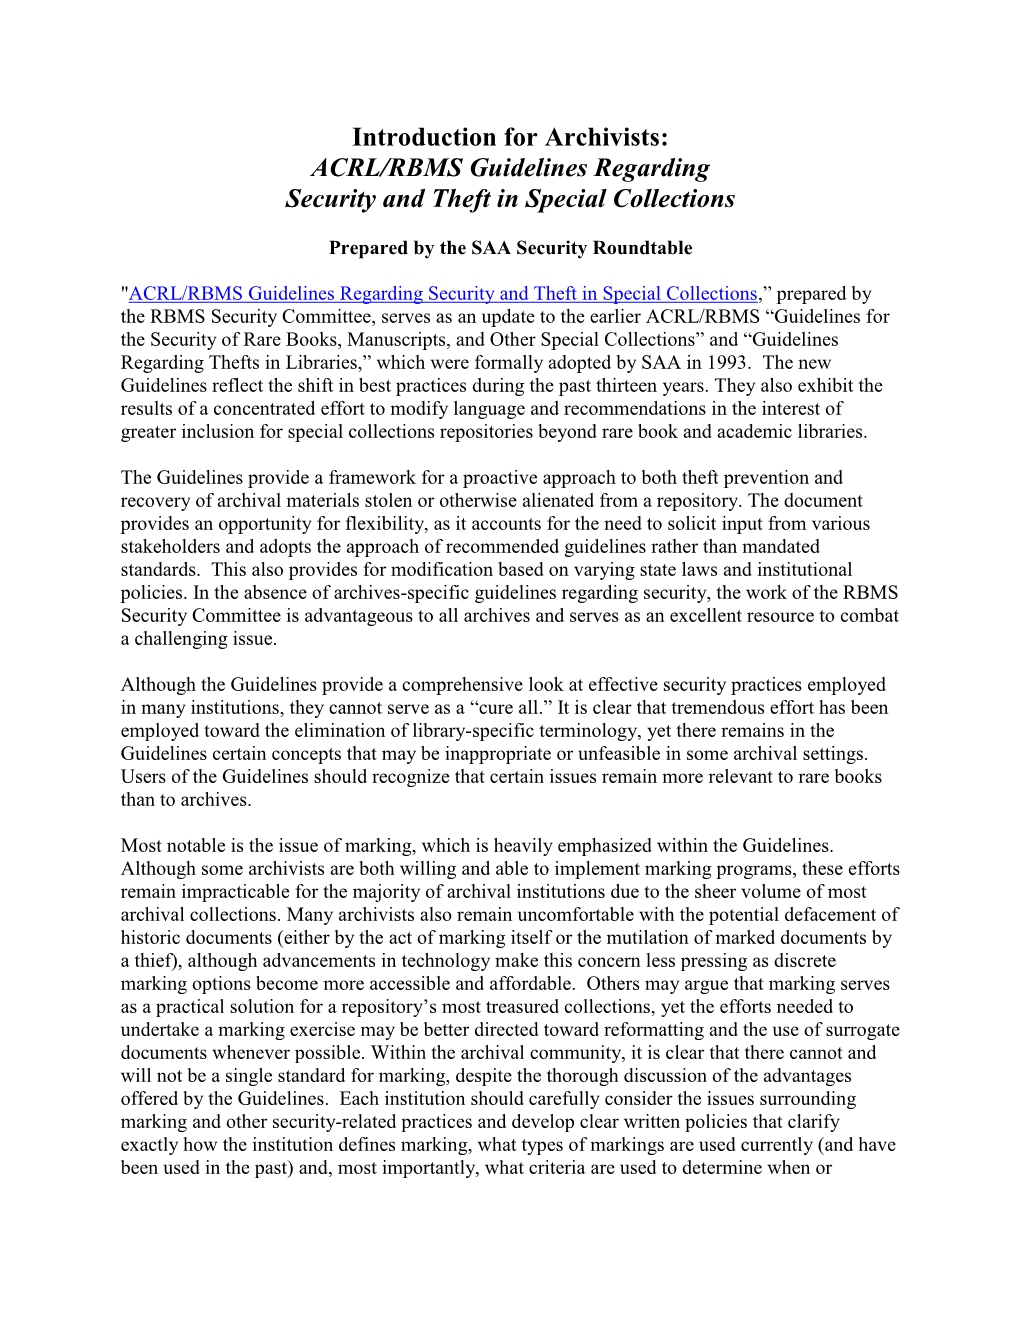 ACRL/RBMS Guidelines Regarding Security and Theft in Special Collections